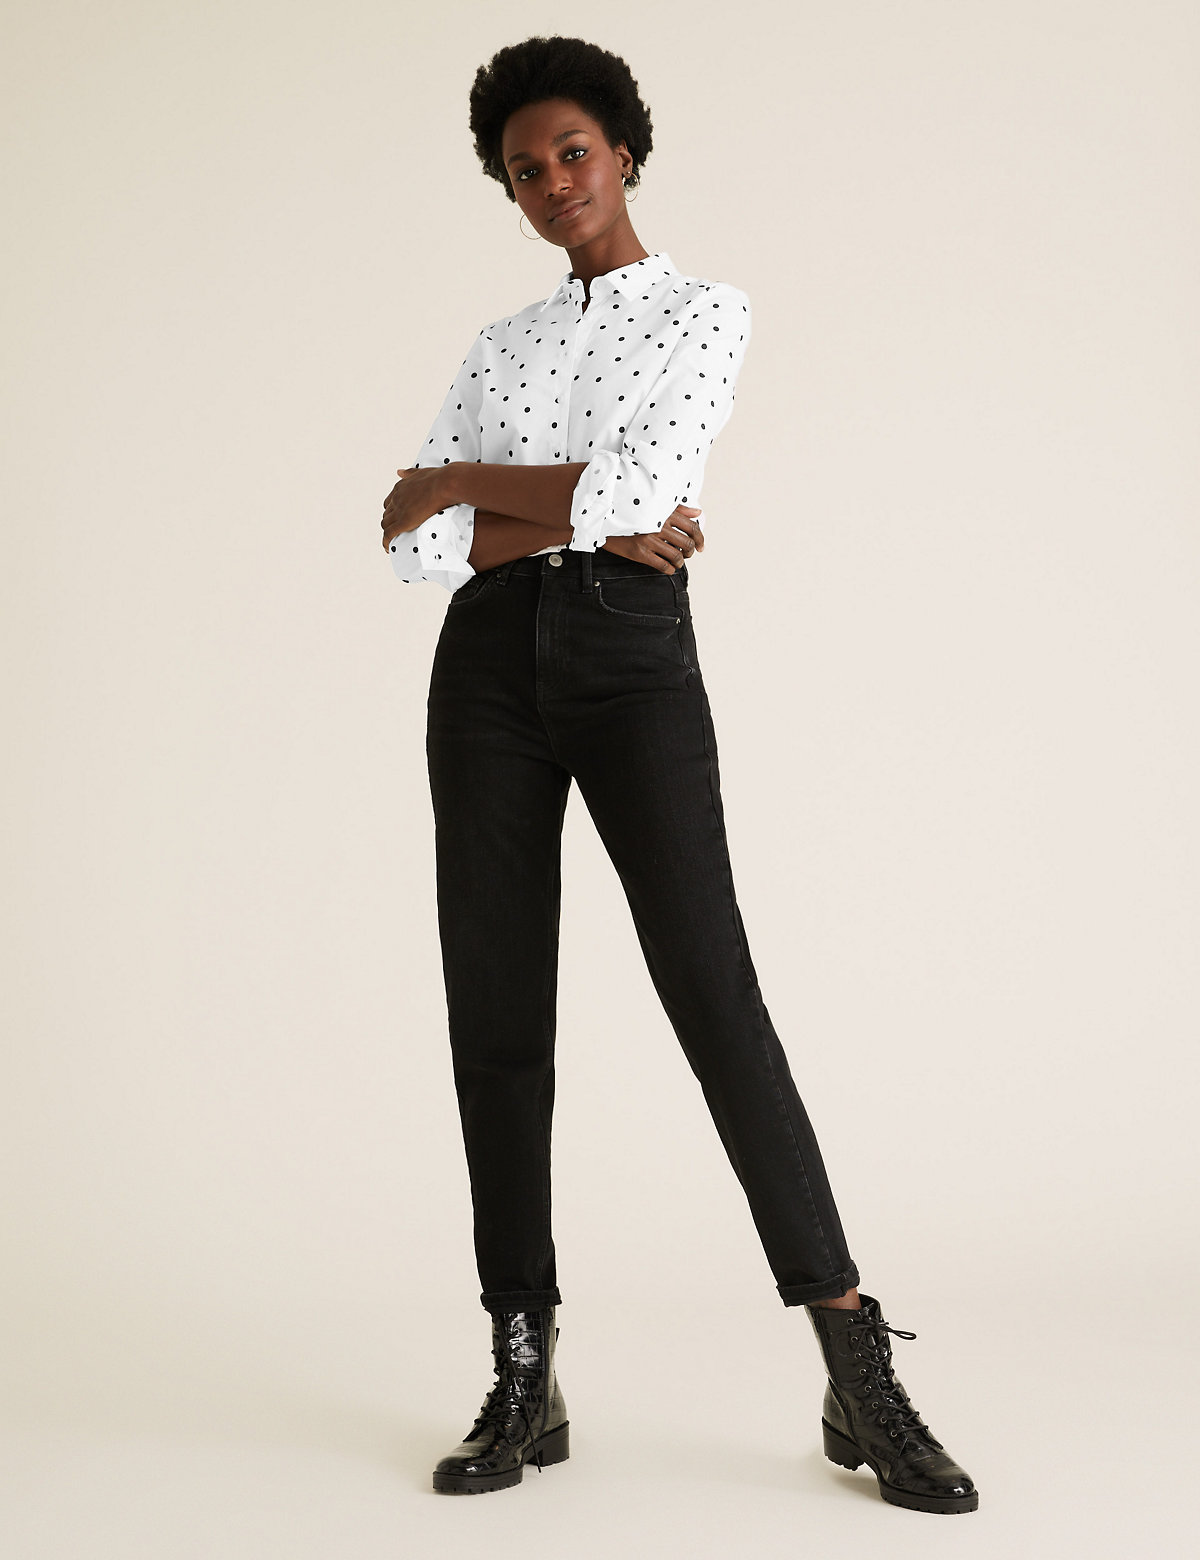 Cotton Polka Dot Fitted Long Sleeve Shirt